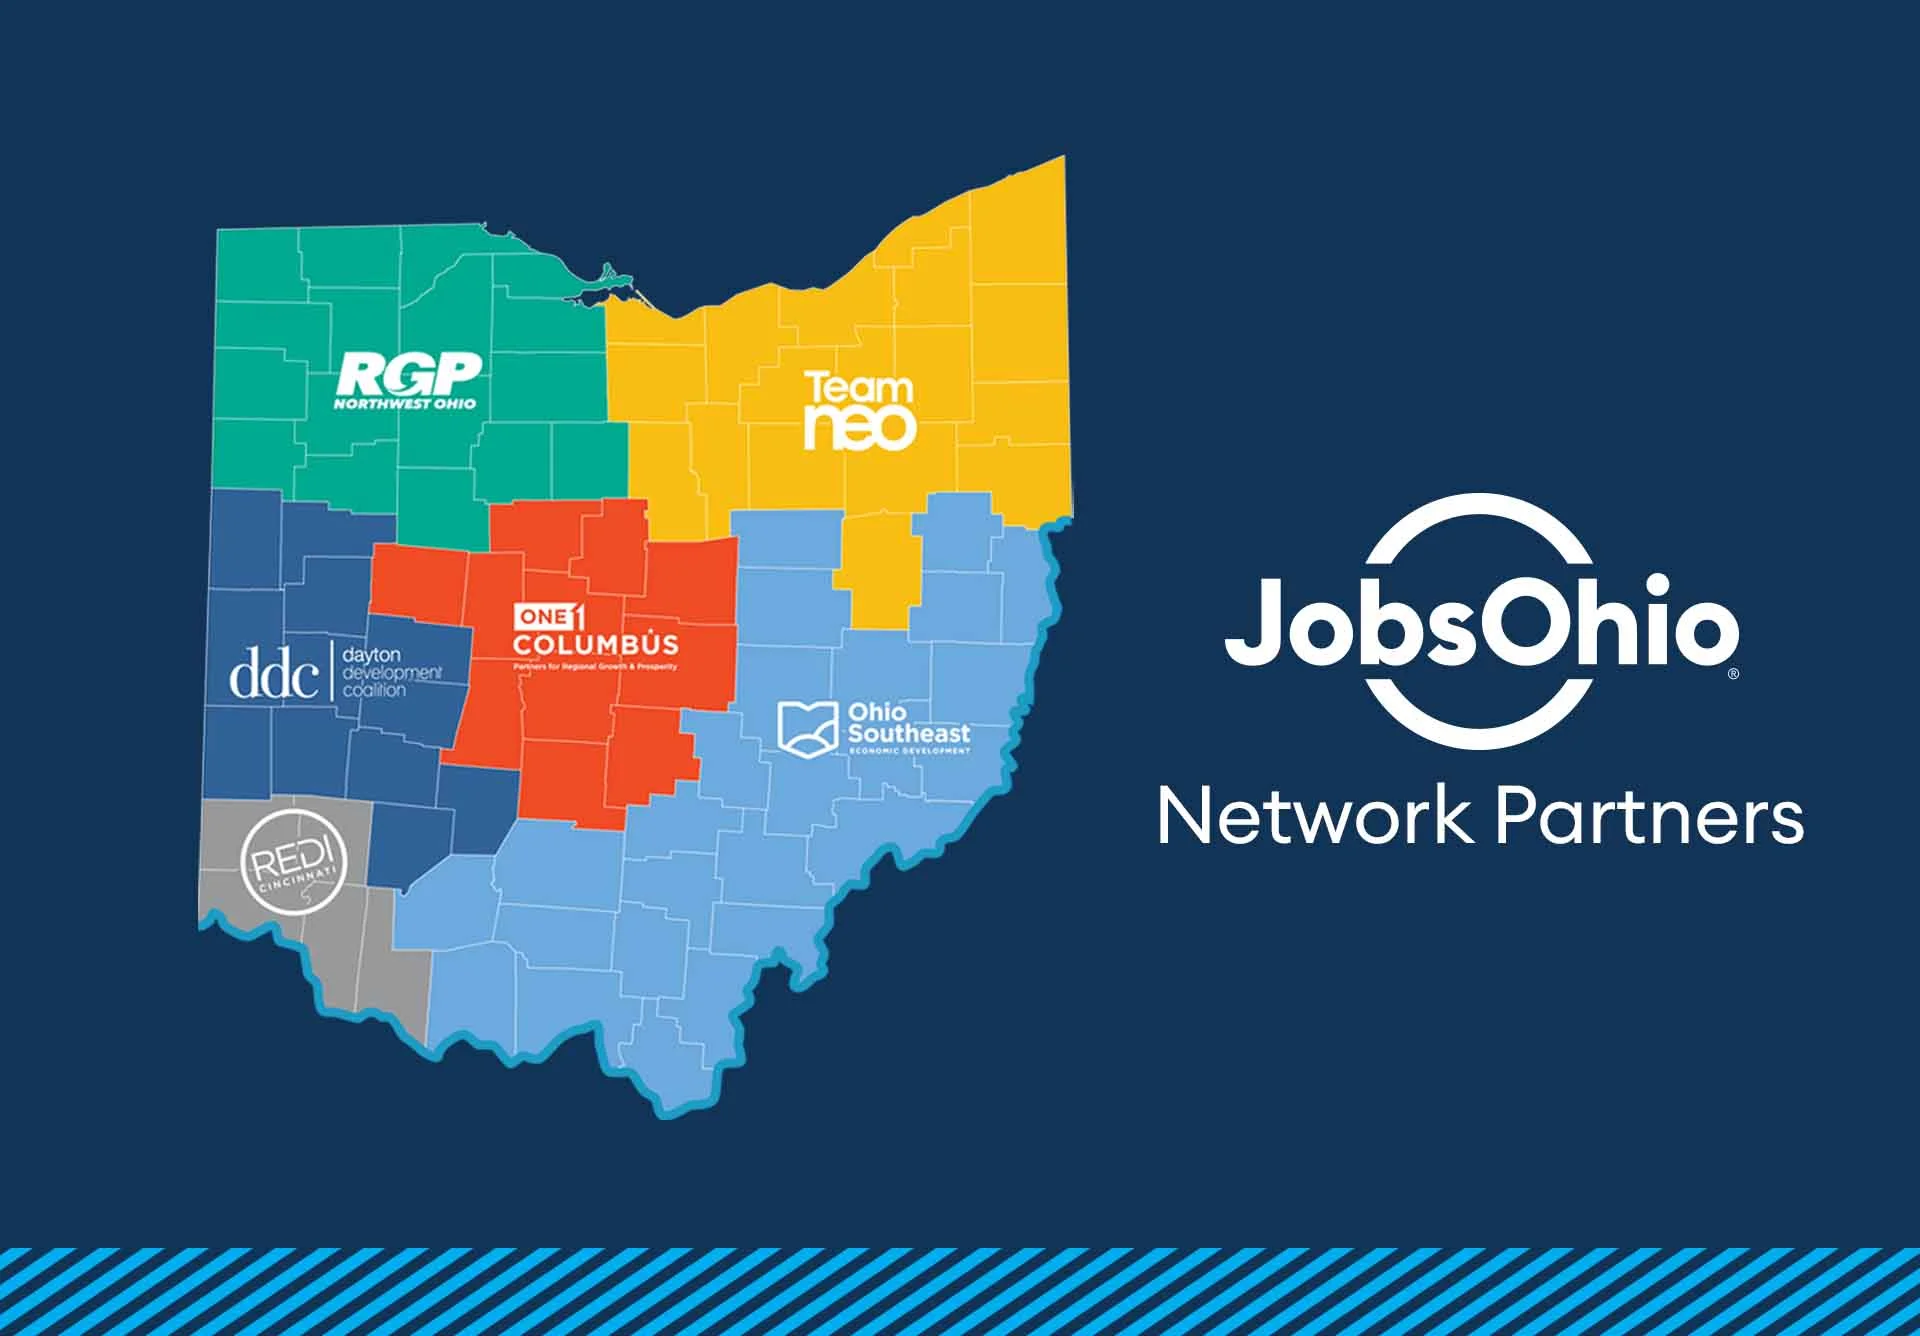 JobsOhio Network Partners with a map of Ohio and partner regions